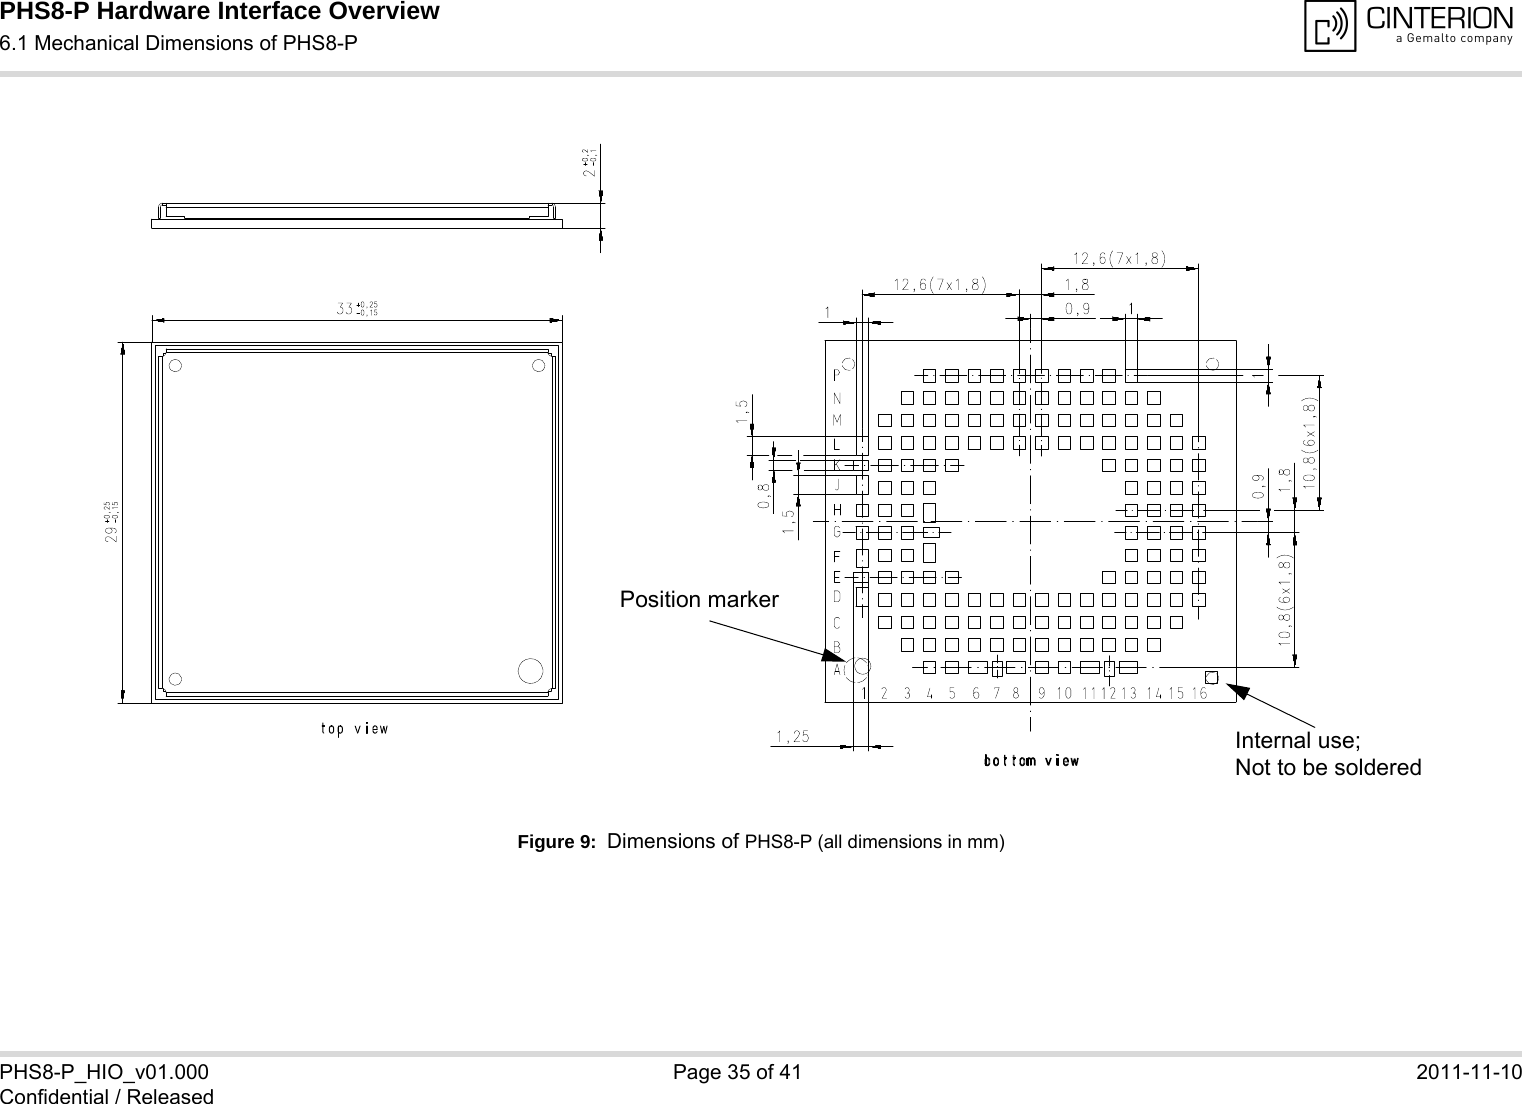 PHS8-P Hardware Interface Overview6.1 Mechanical Dimensions of PHS8-P35PHS8-P_HIO_v01.000 Page 35 of 41 2011-11-10Confidential / ReleasedFigure 9:  Dimensions of PHS8-P (all dimensions in mm)Internal use; Not to be solderedPosition marker